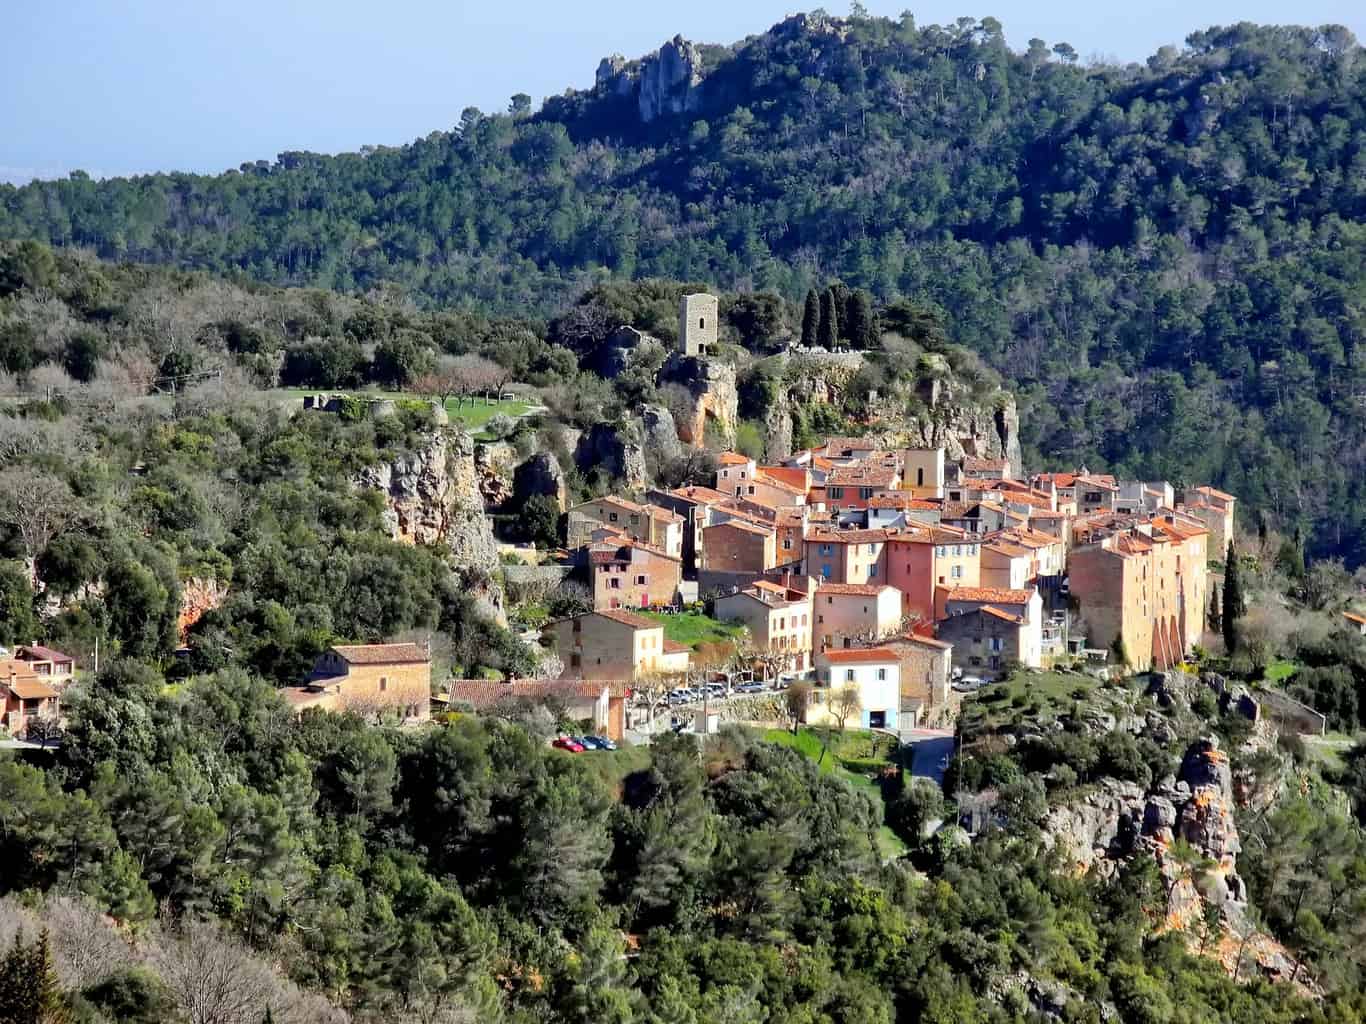 13 off-the-beaten-track places in France you didn’t know existed